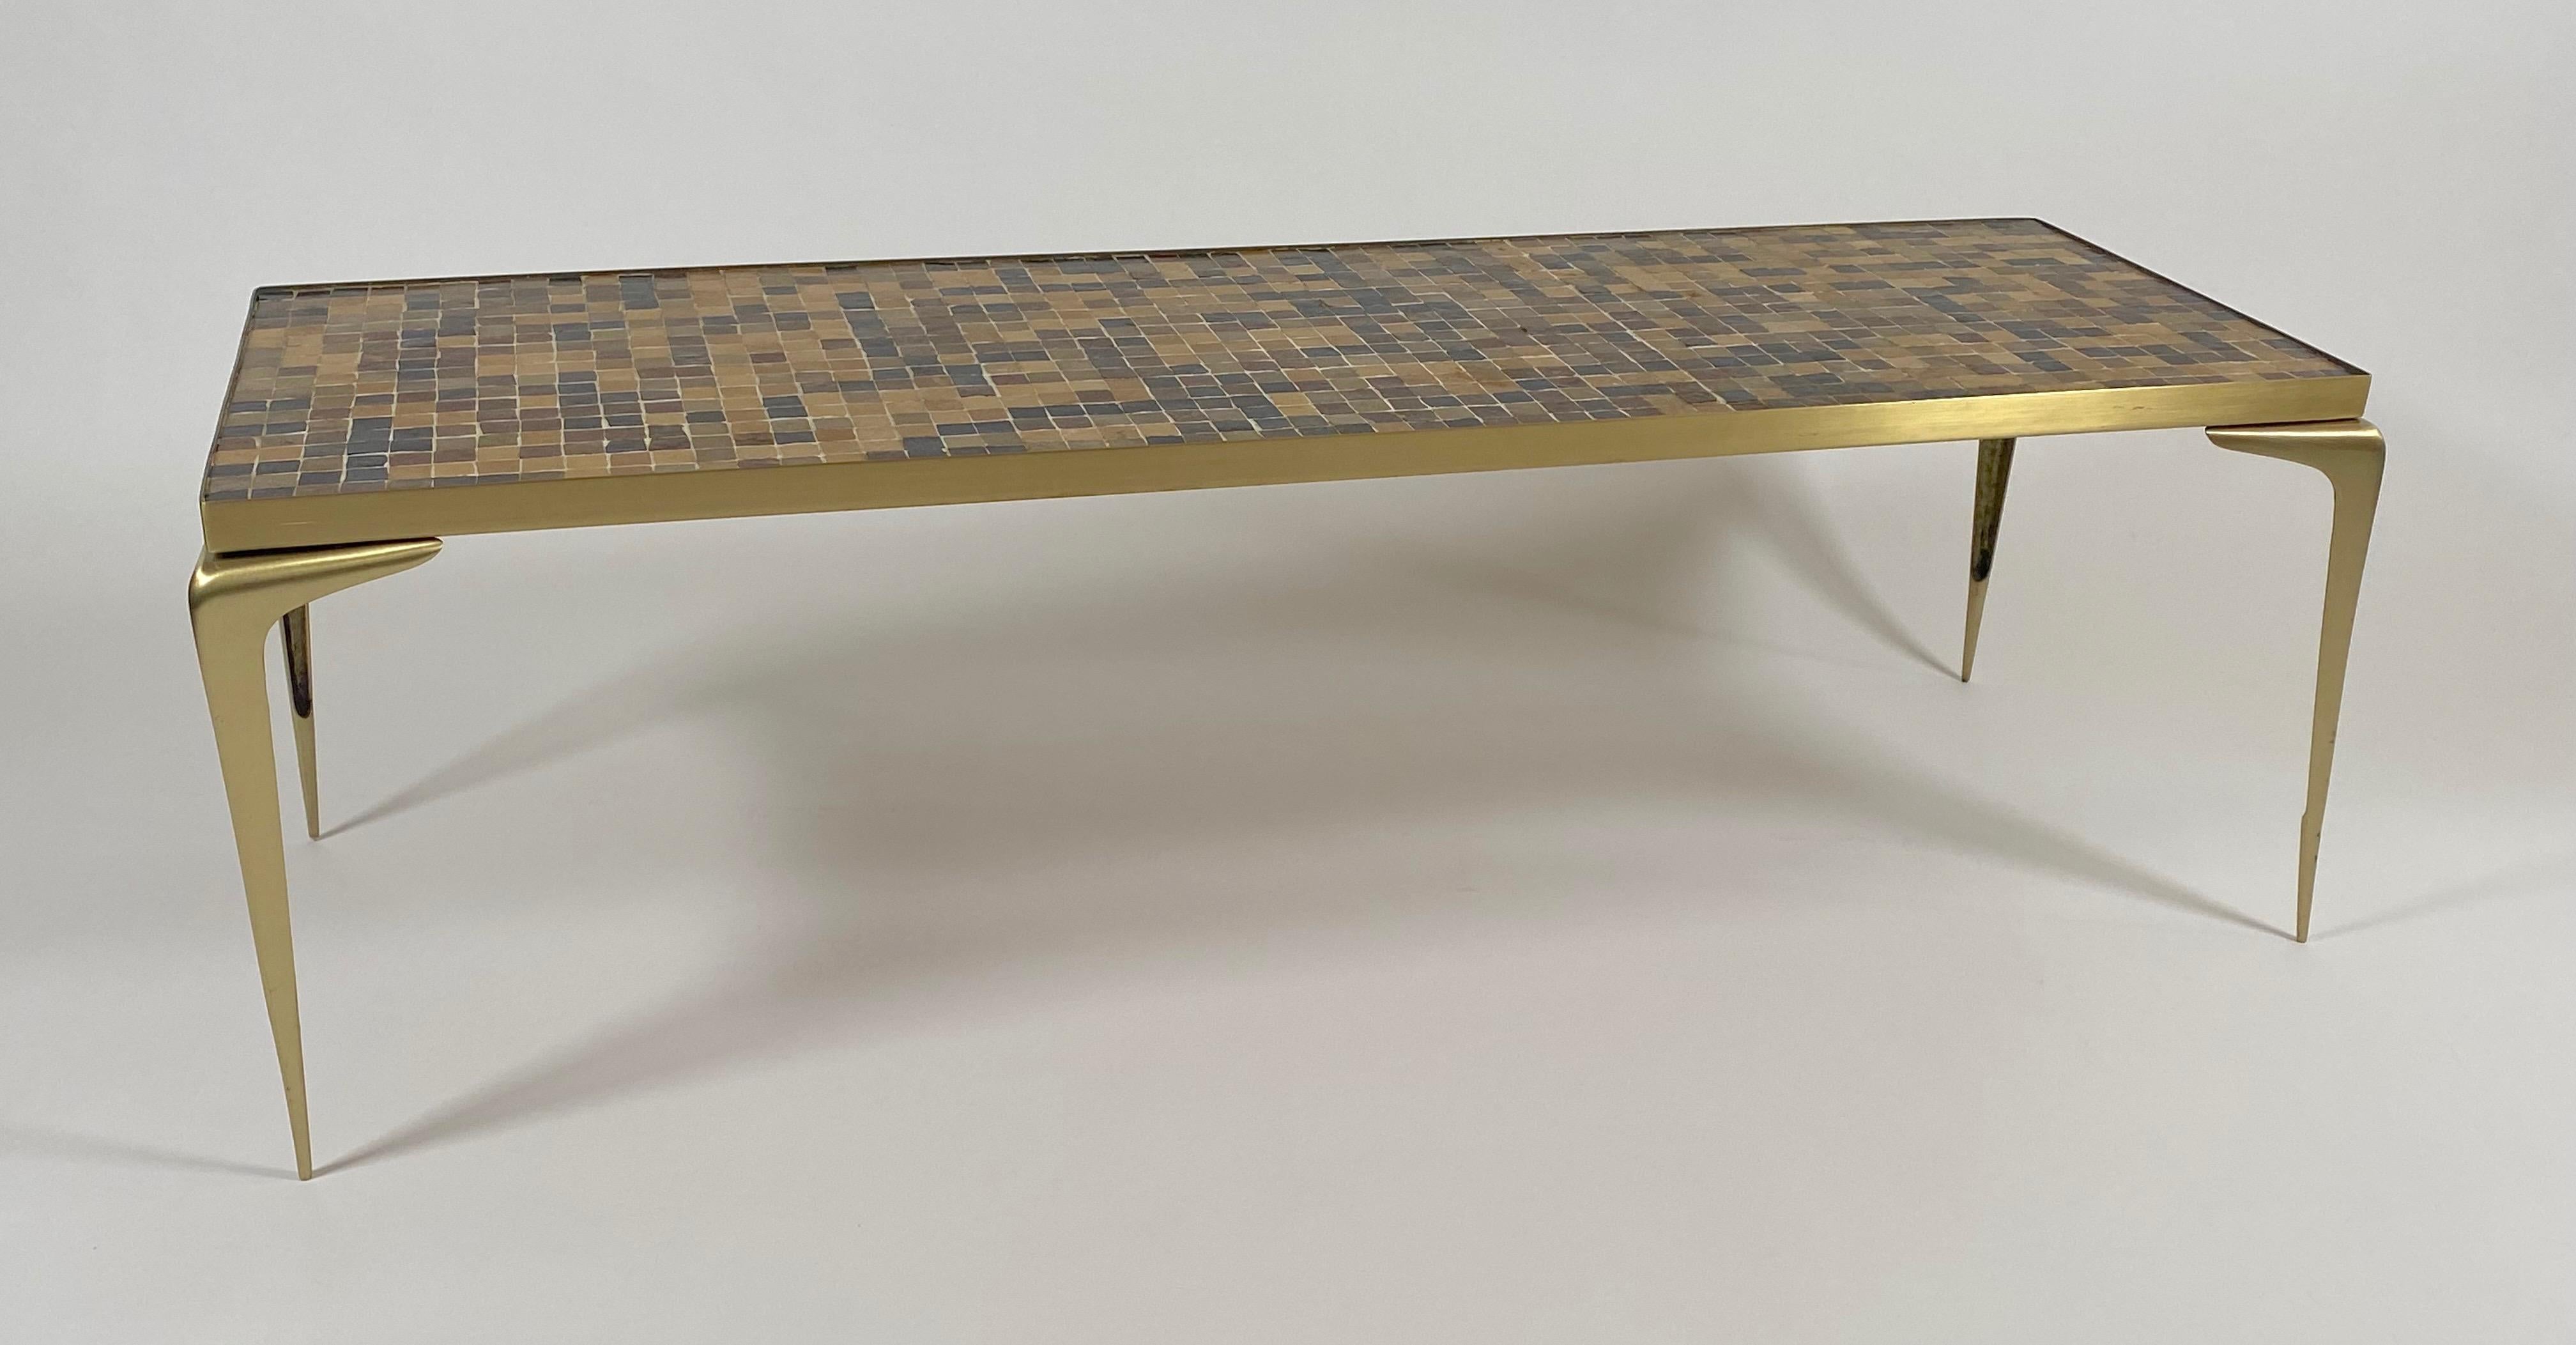 1960s mosaic and brass coffee from Japan, the mosaic is comprised of square glass tiles in various earth toned colors. The coffee table is constructed of solid brass with graceful slender curved legs with pointed ends, the shape is a somewhat narrow